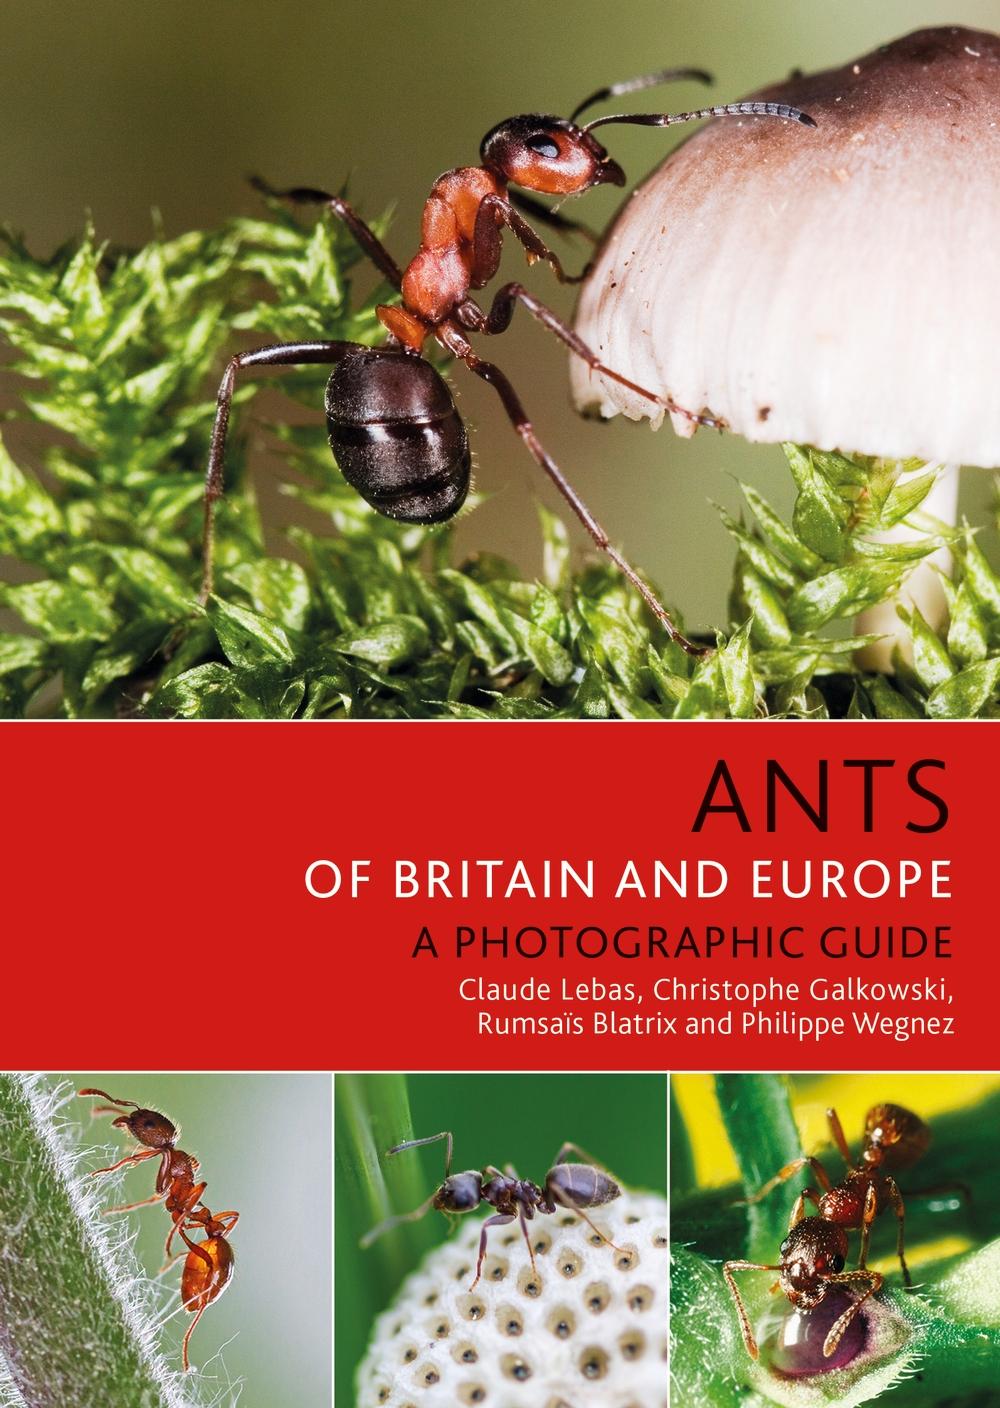 Ants of Britain and Europe - Claude Lebas